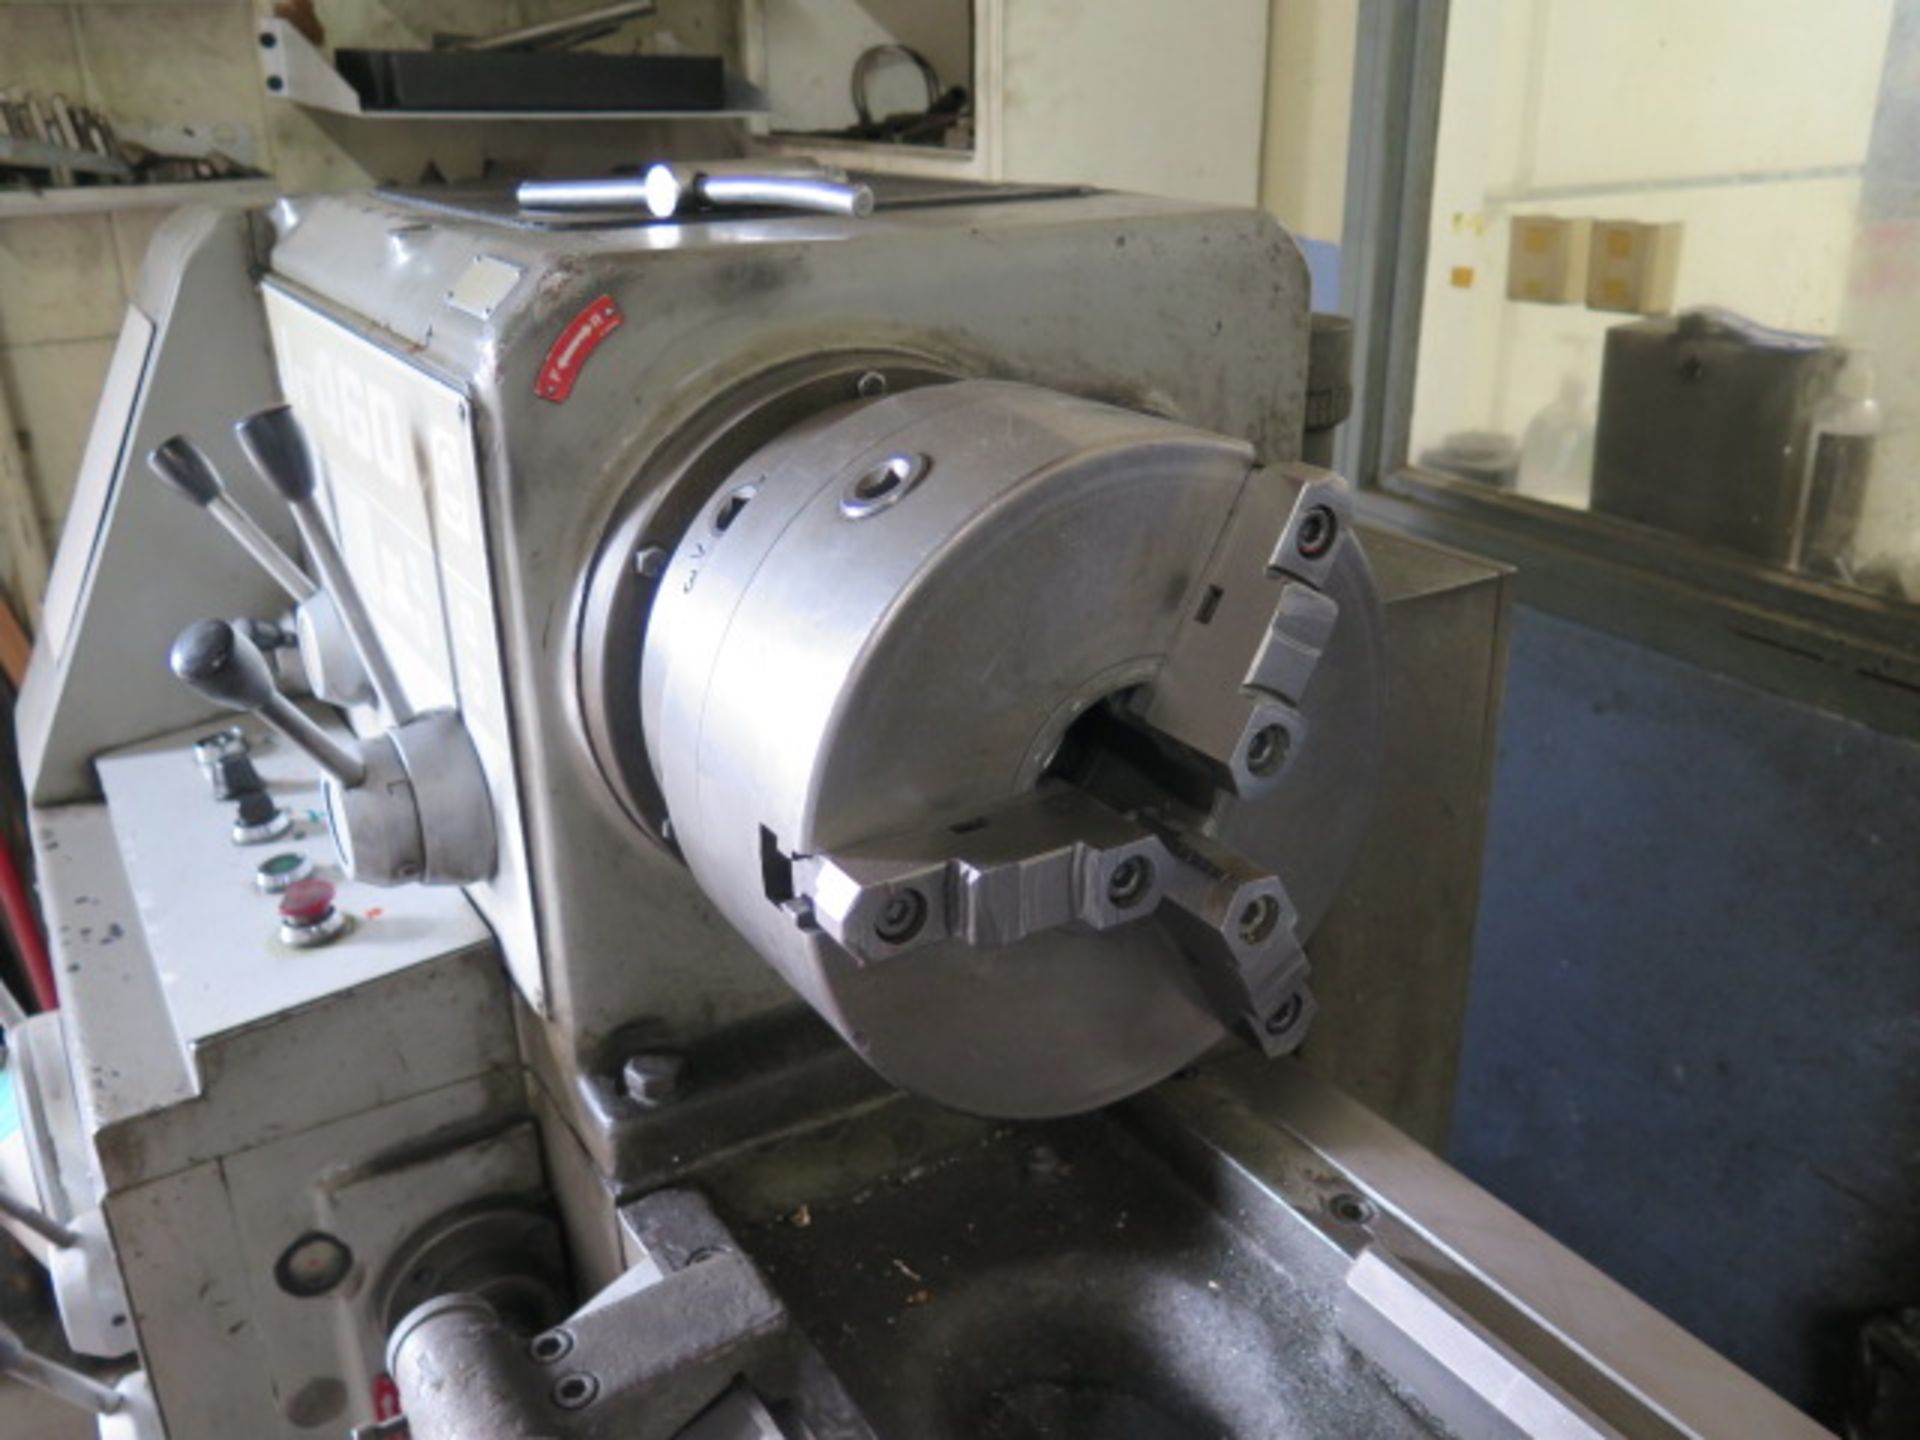 JFMT-Amura 18” x 60” geared Head Gap Bed Lathe s/n 768 w/ 30-1250 RPM, Inch/mm Threading, SOLD AS IS - Image 5 of 13